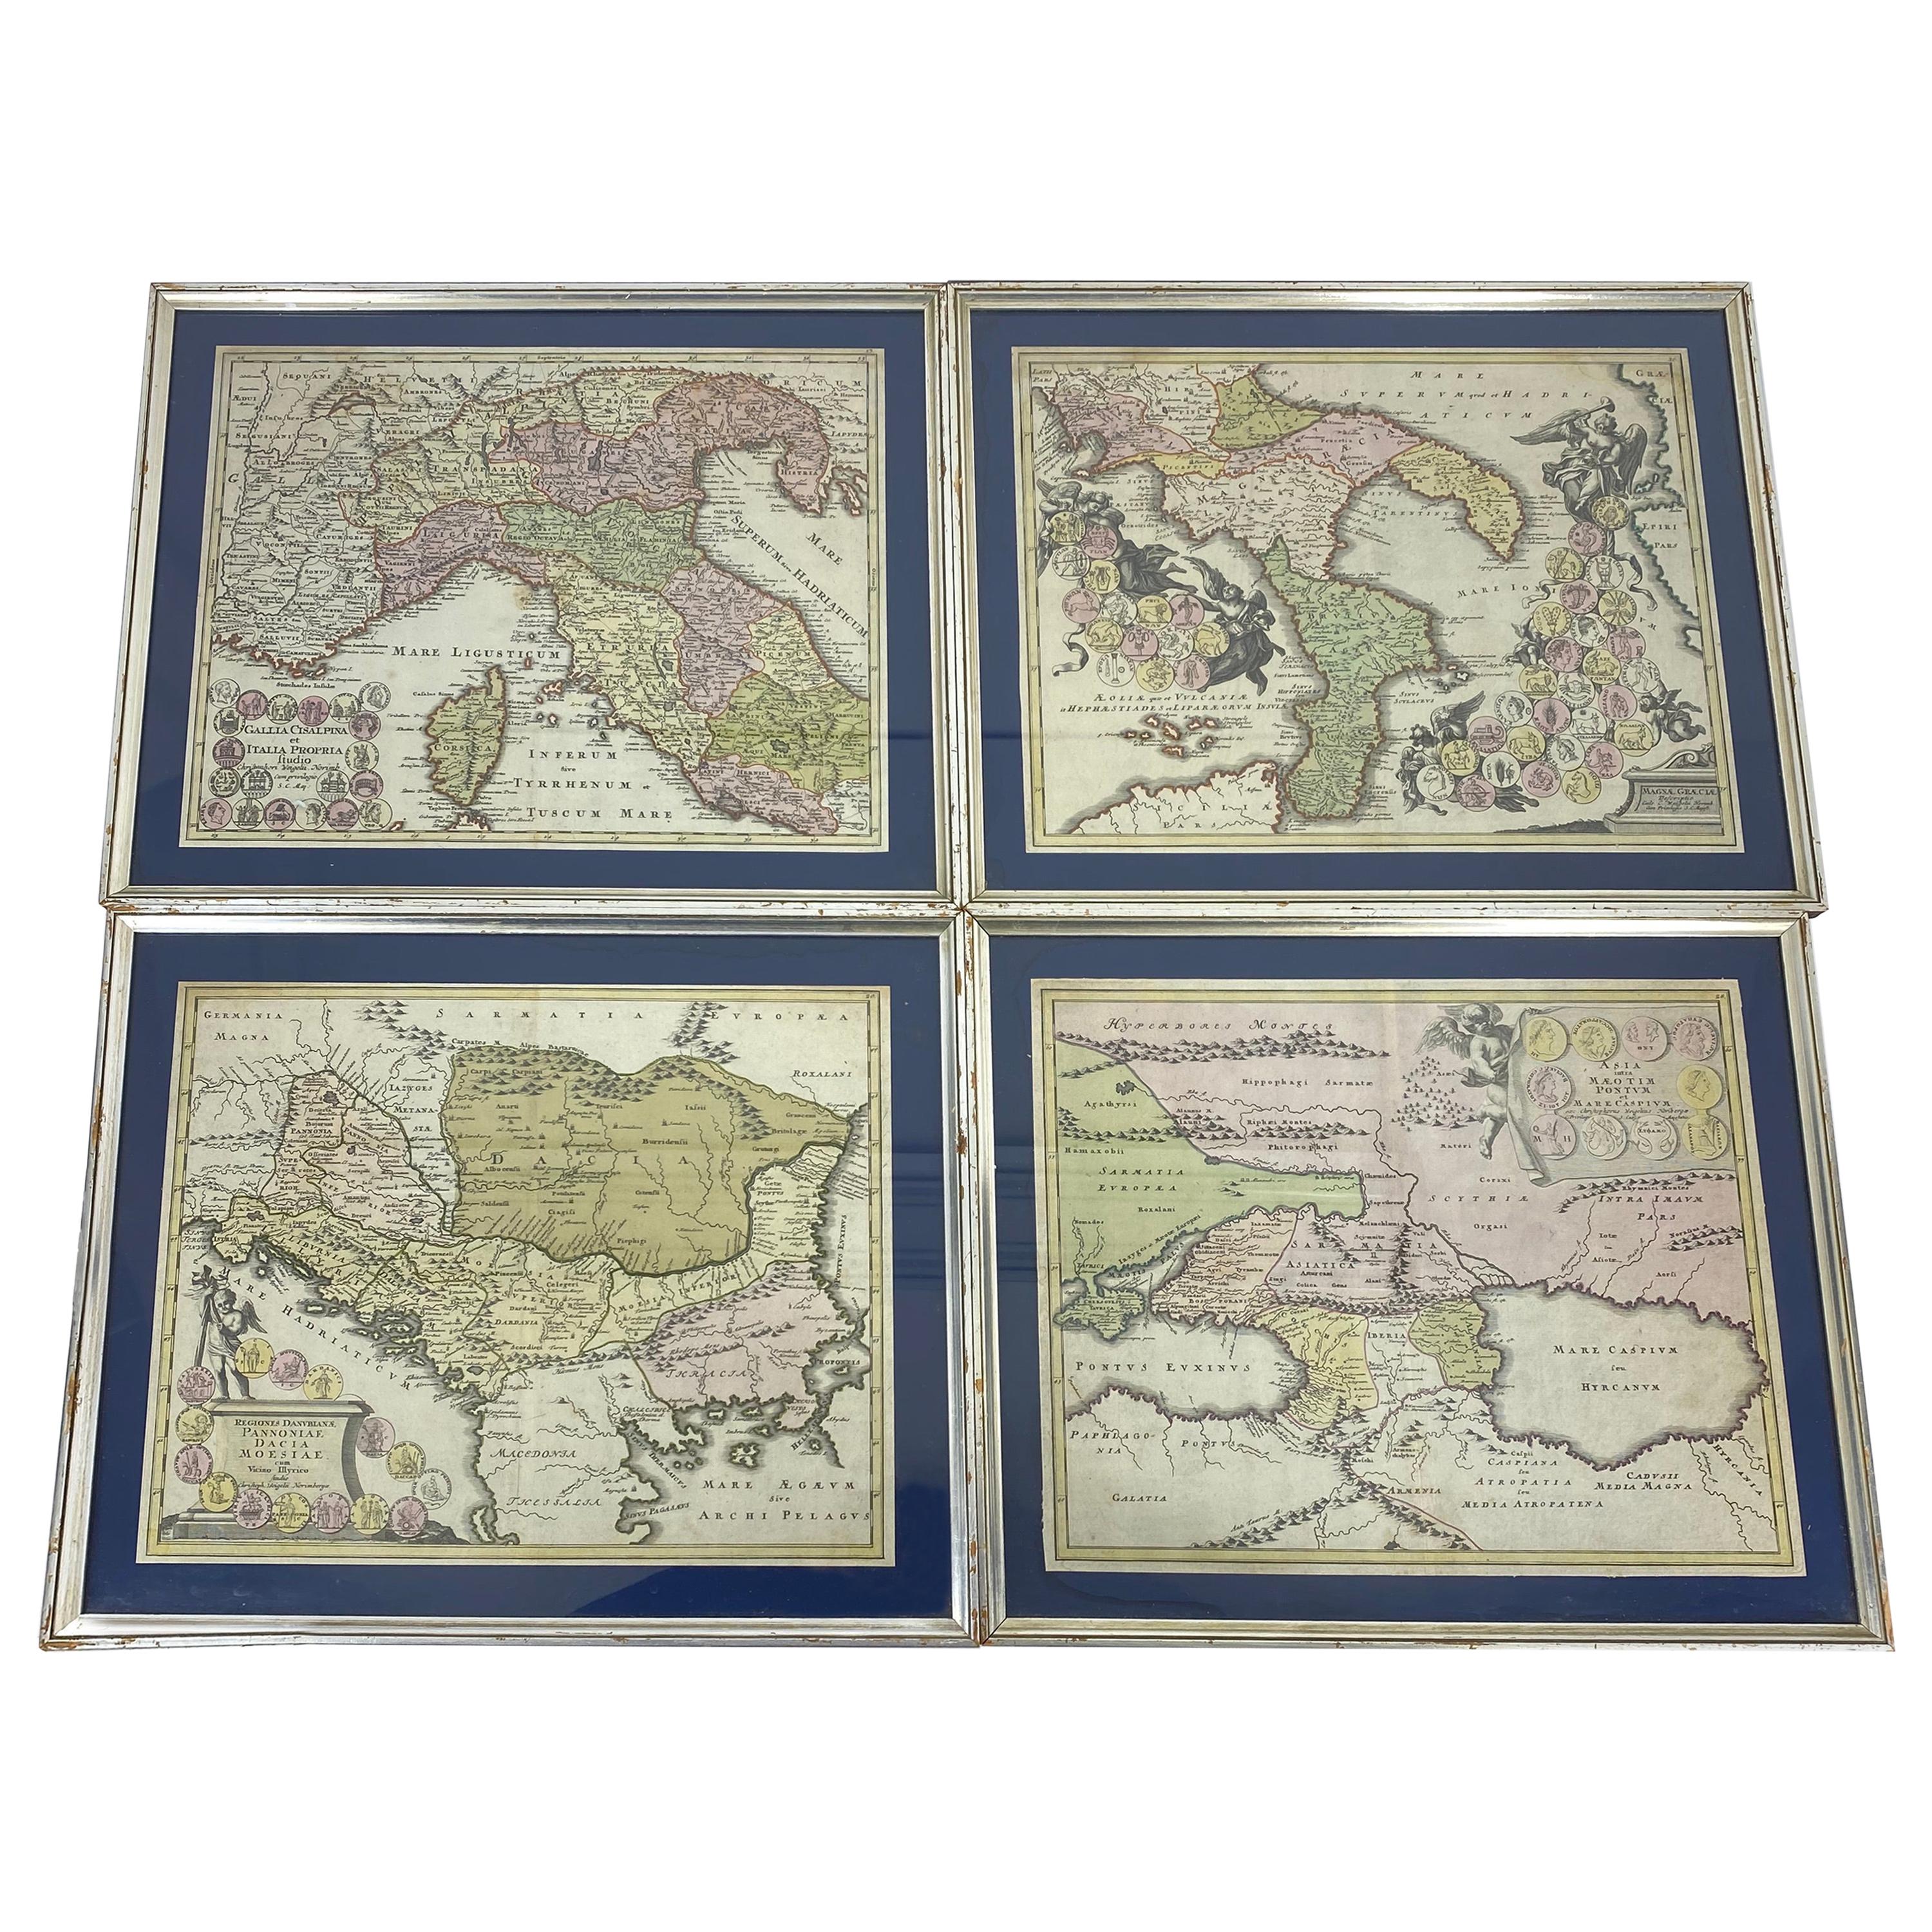 Set Of 4 Silver Gilded Framed Maps Of Italy And Danube In Blue Passe-Partout